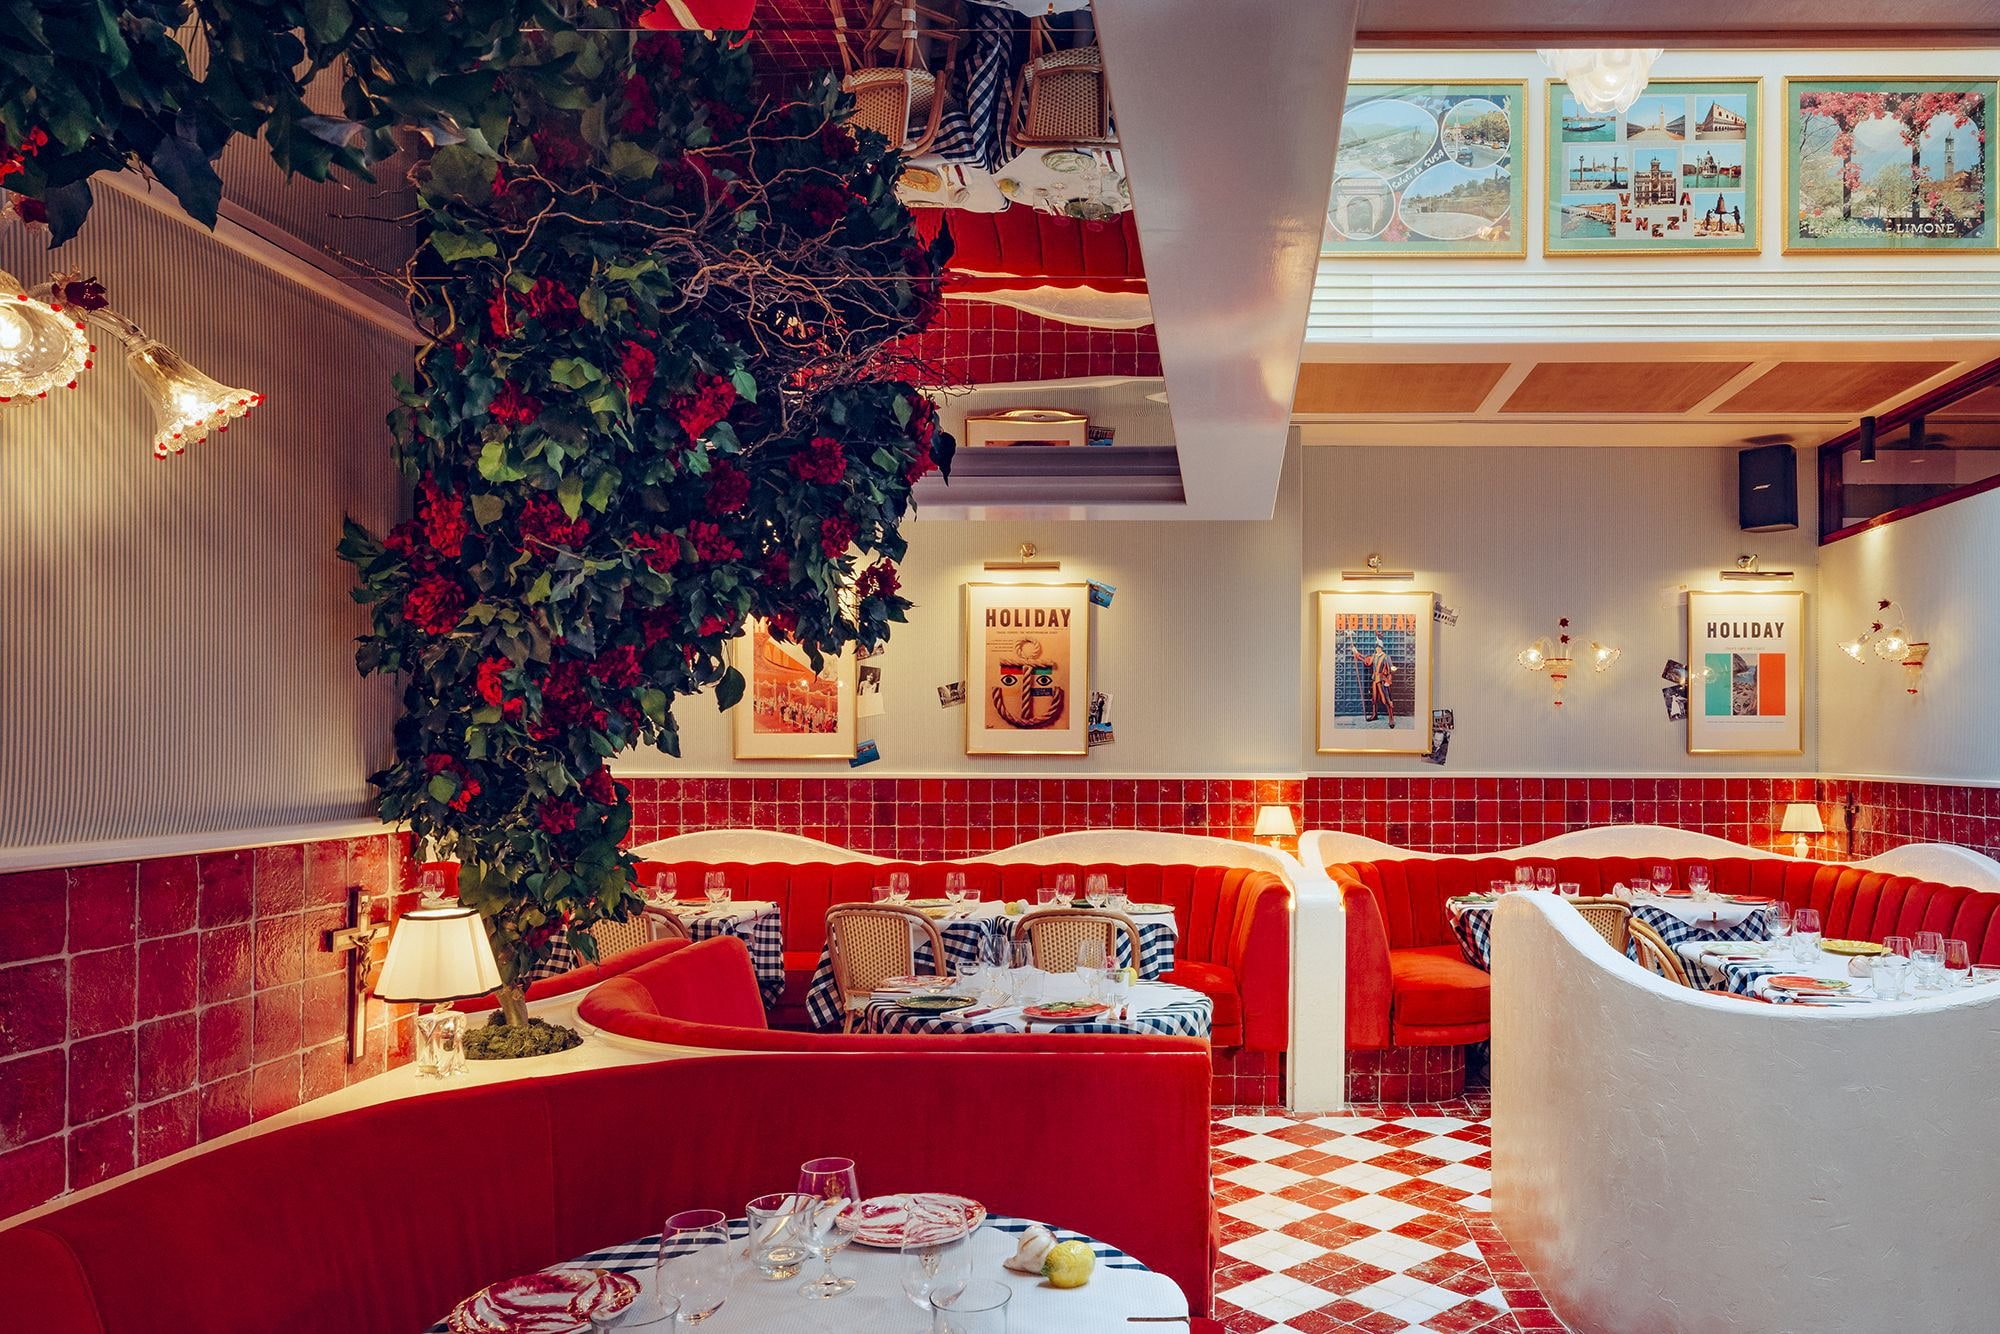 Guide to wow-factor restaurants in London